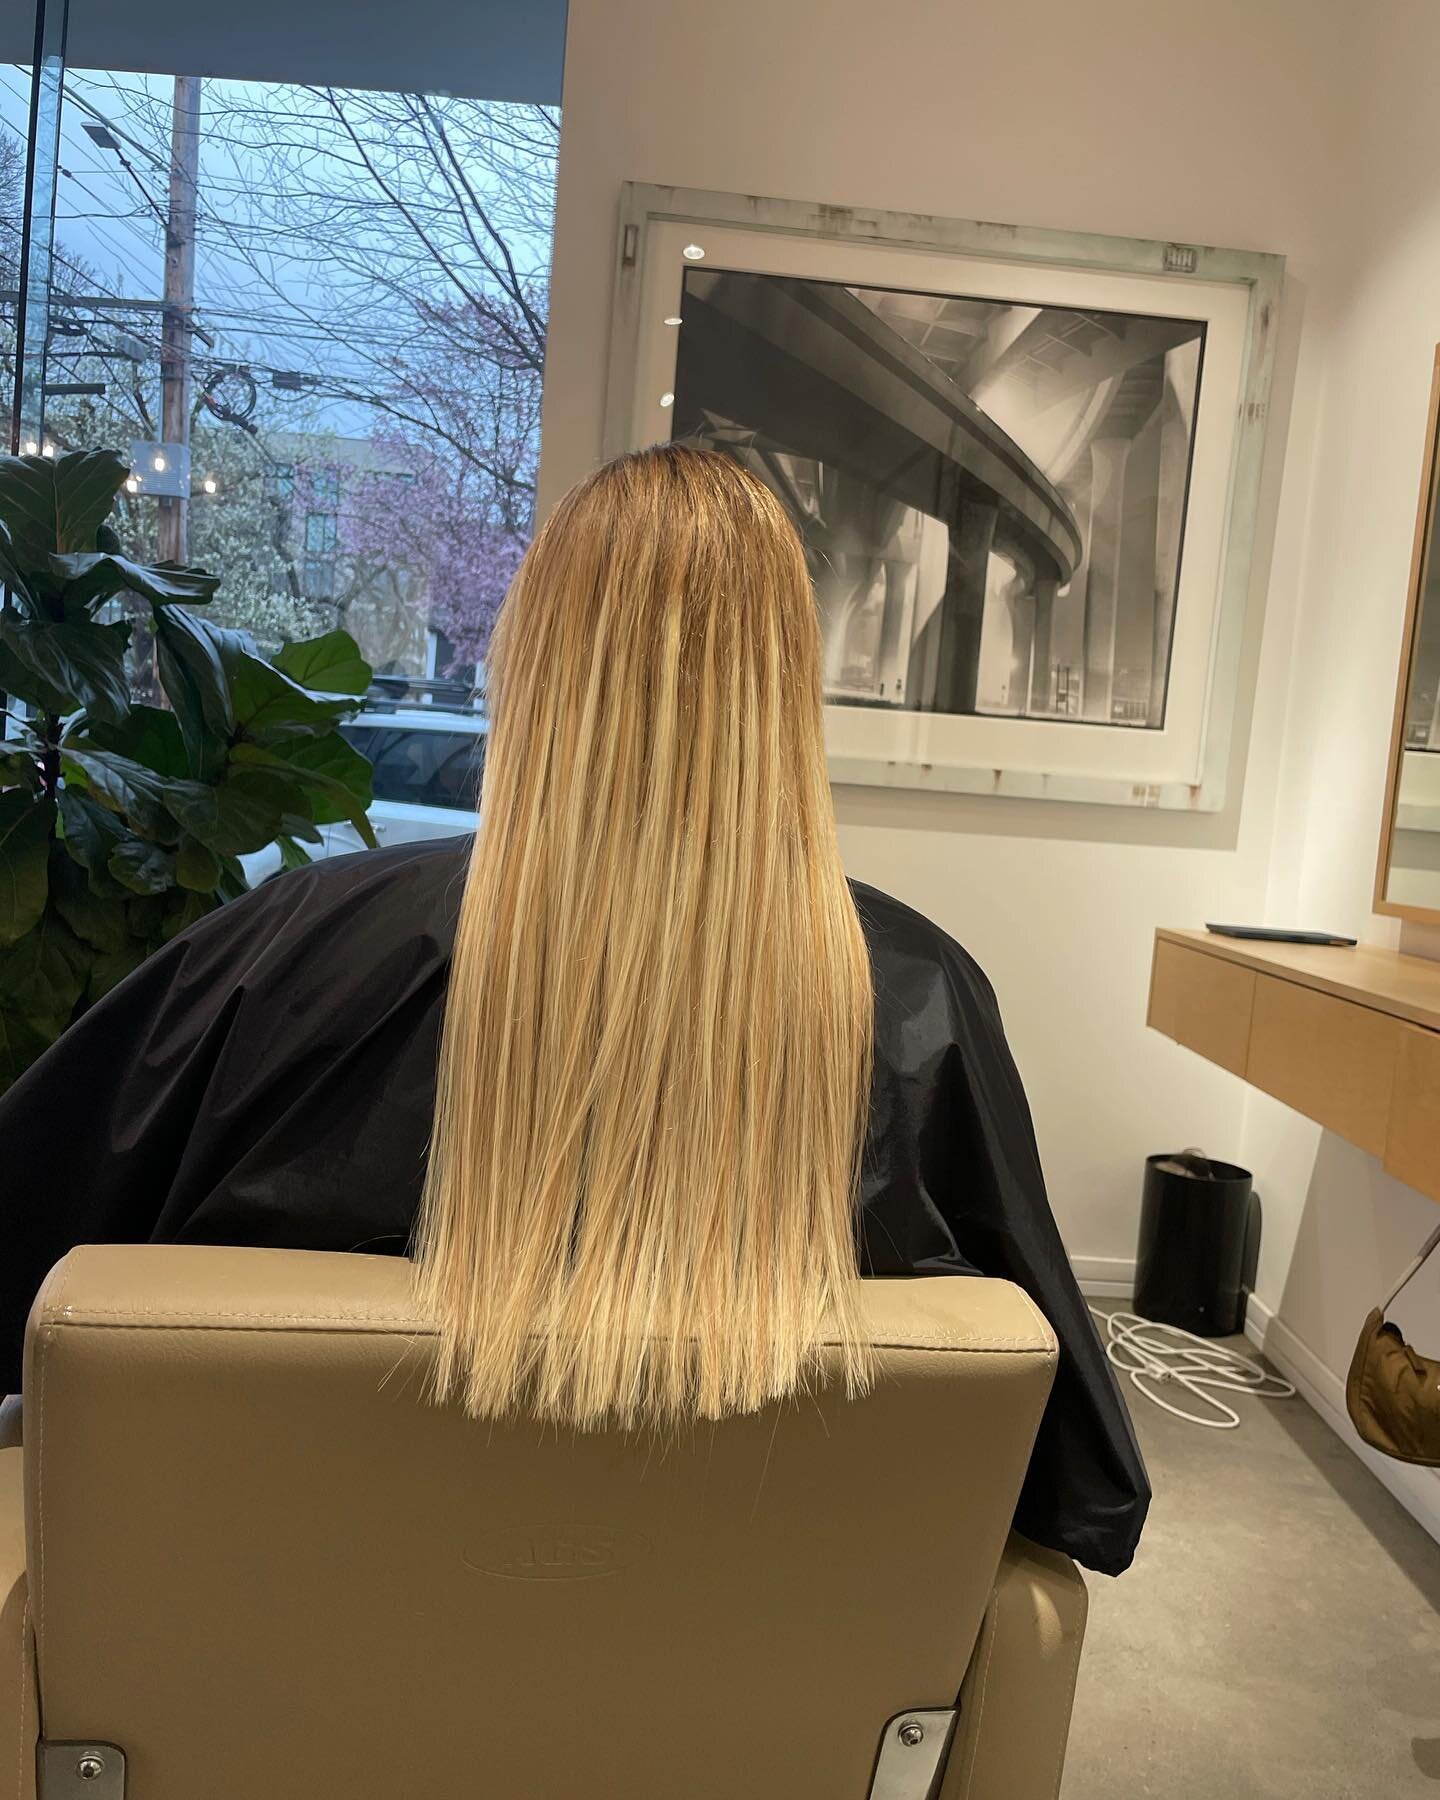 Sweet little lady . Short to long all in a days work. #pdxhairstylist #pdxhair #portlandhairstylist #portlandhairextensions #behindthechair #remyhairextensions#pdxhairextensions #pdxhairextensionspecialist #nwsalon #portlandoregonhairextensions